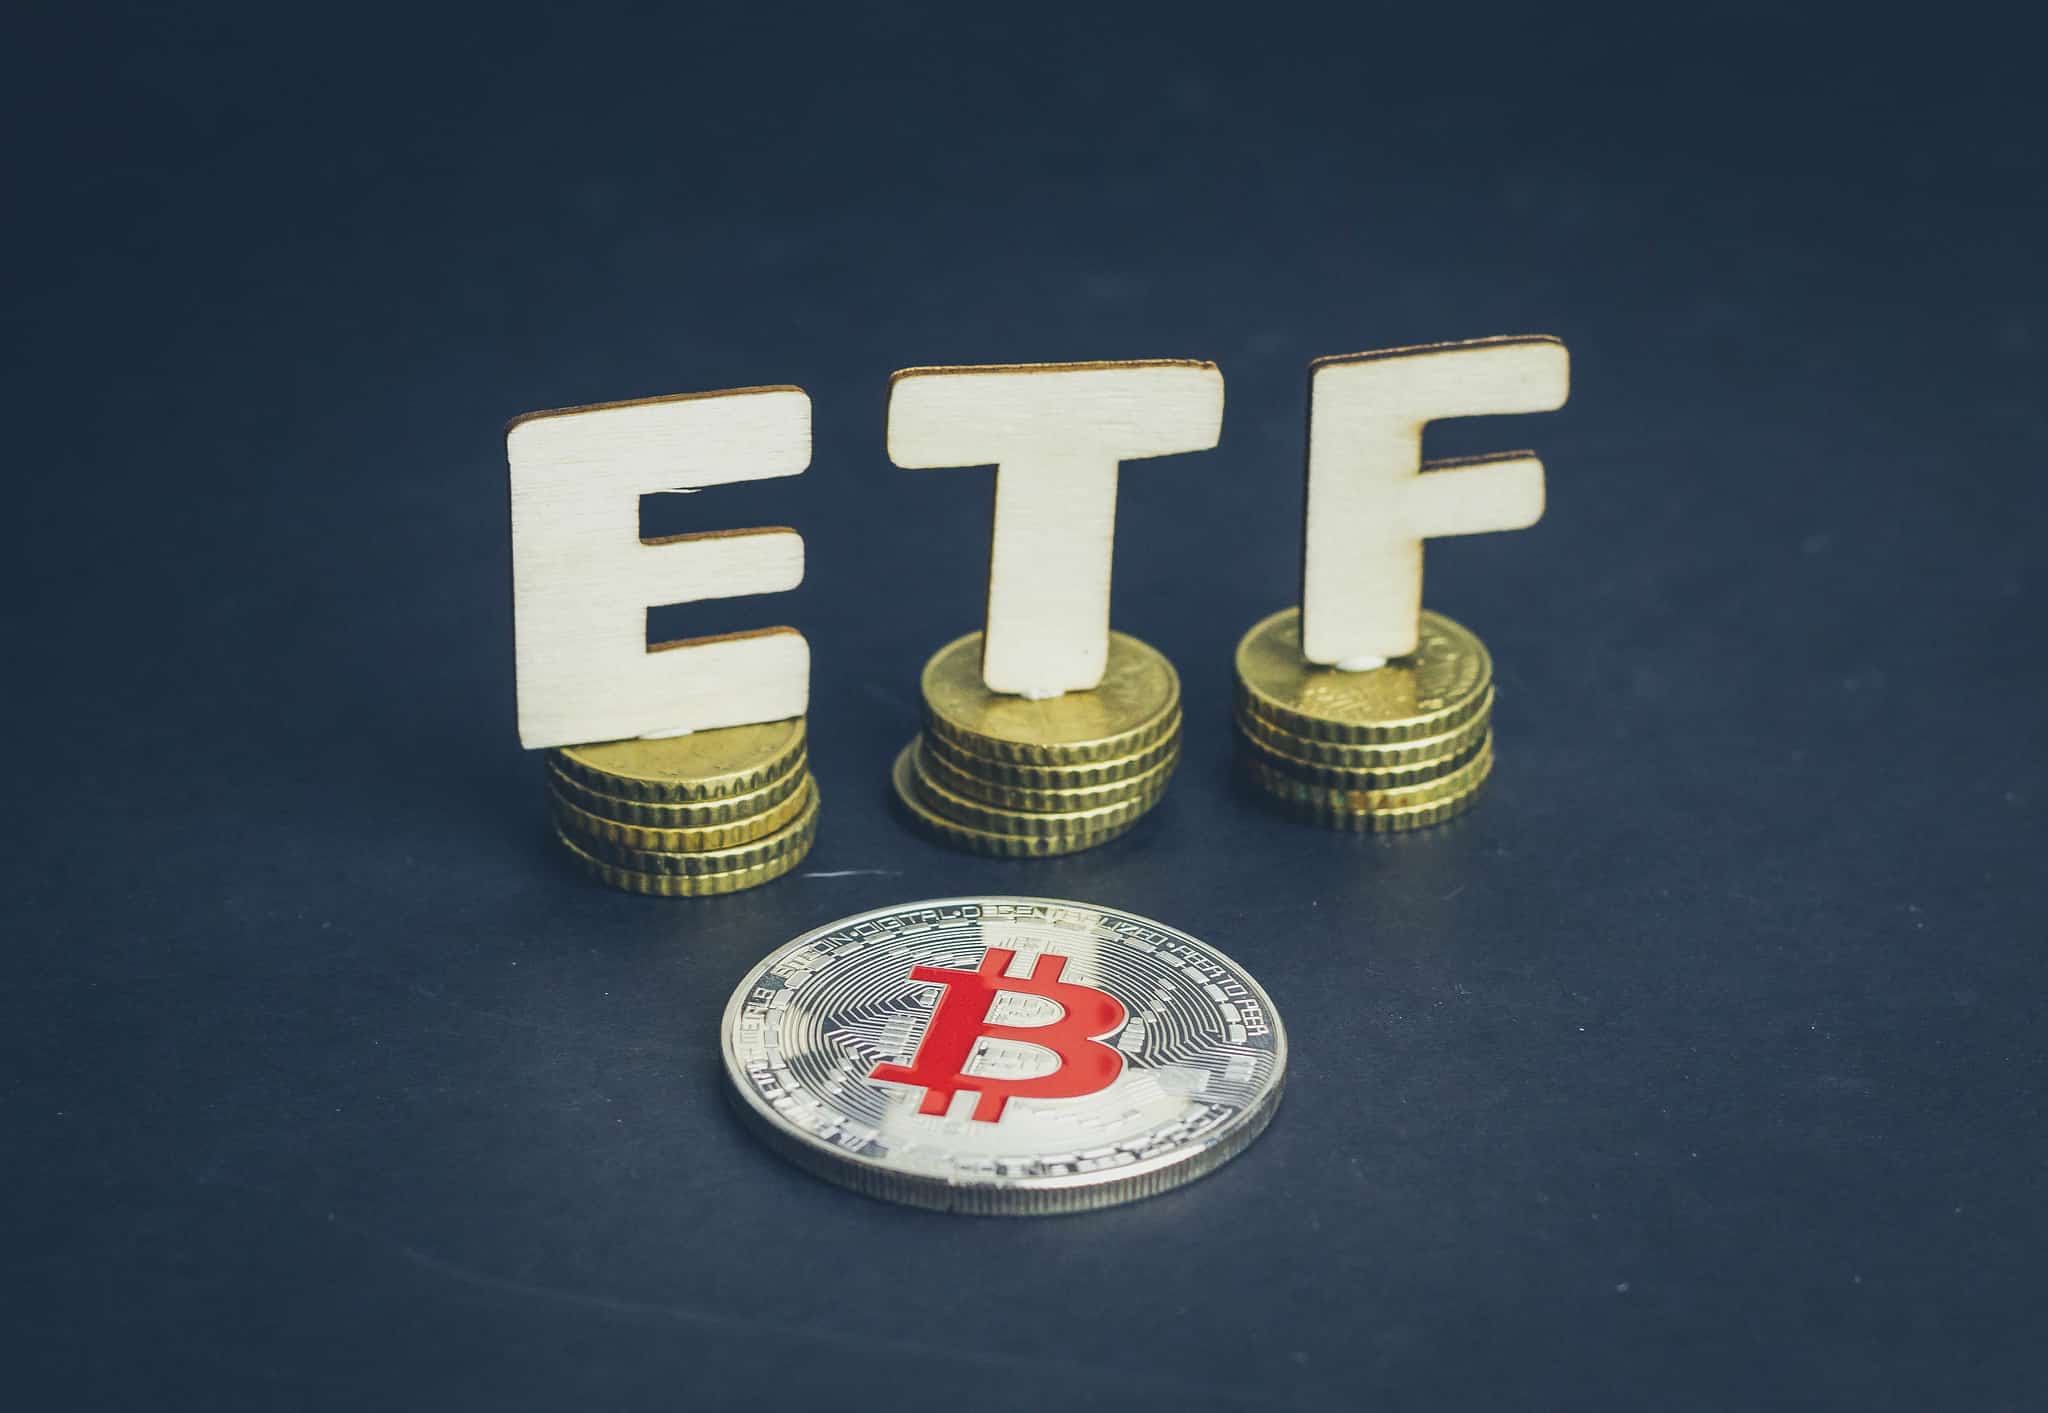 SEC postpones NYDIG Bitcoin ETF decision to March